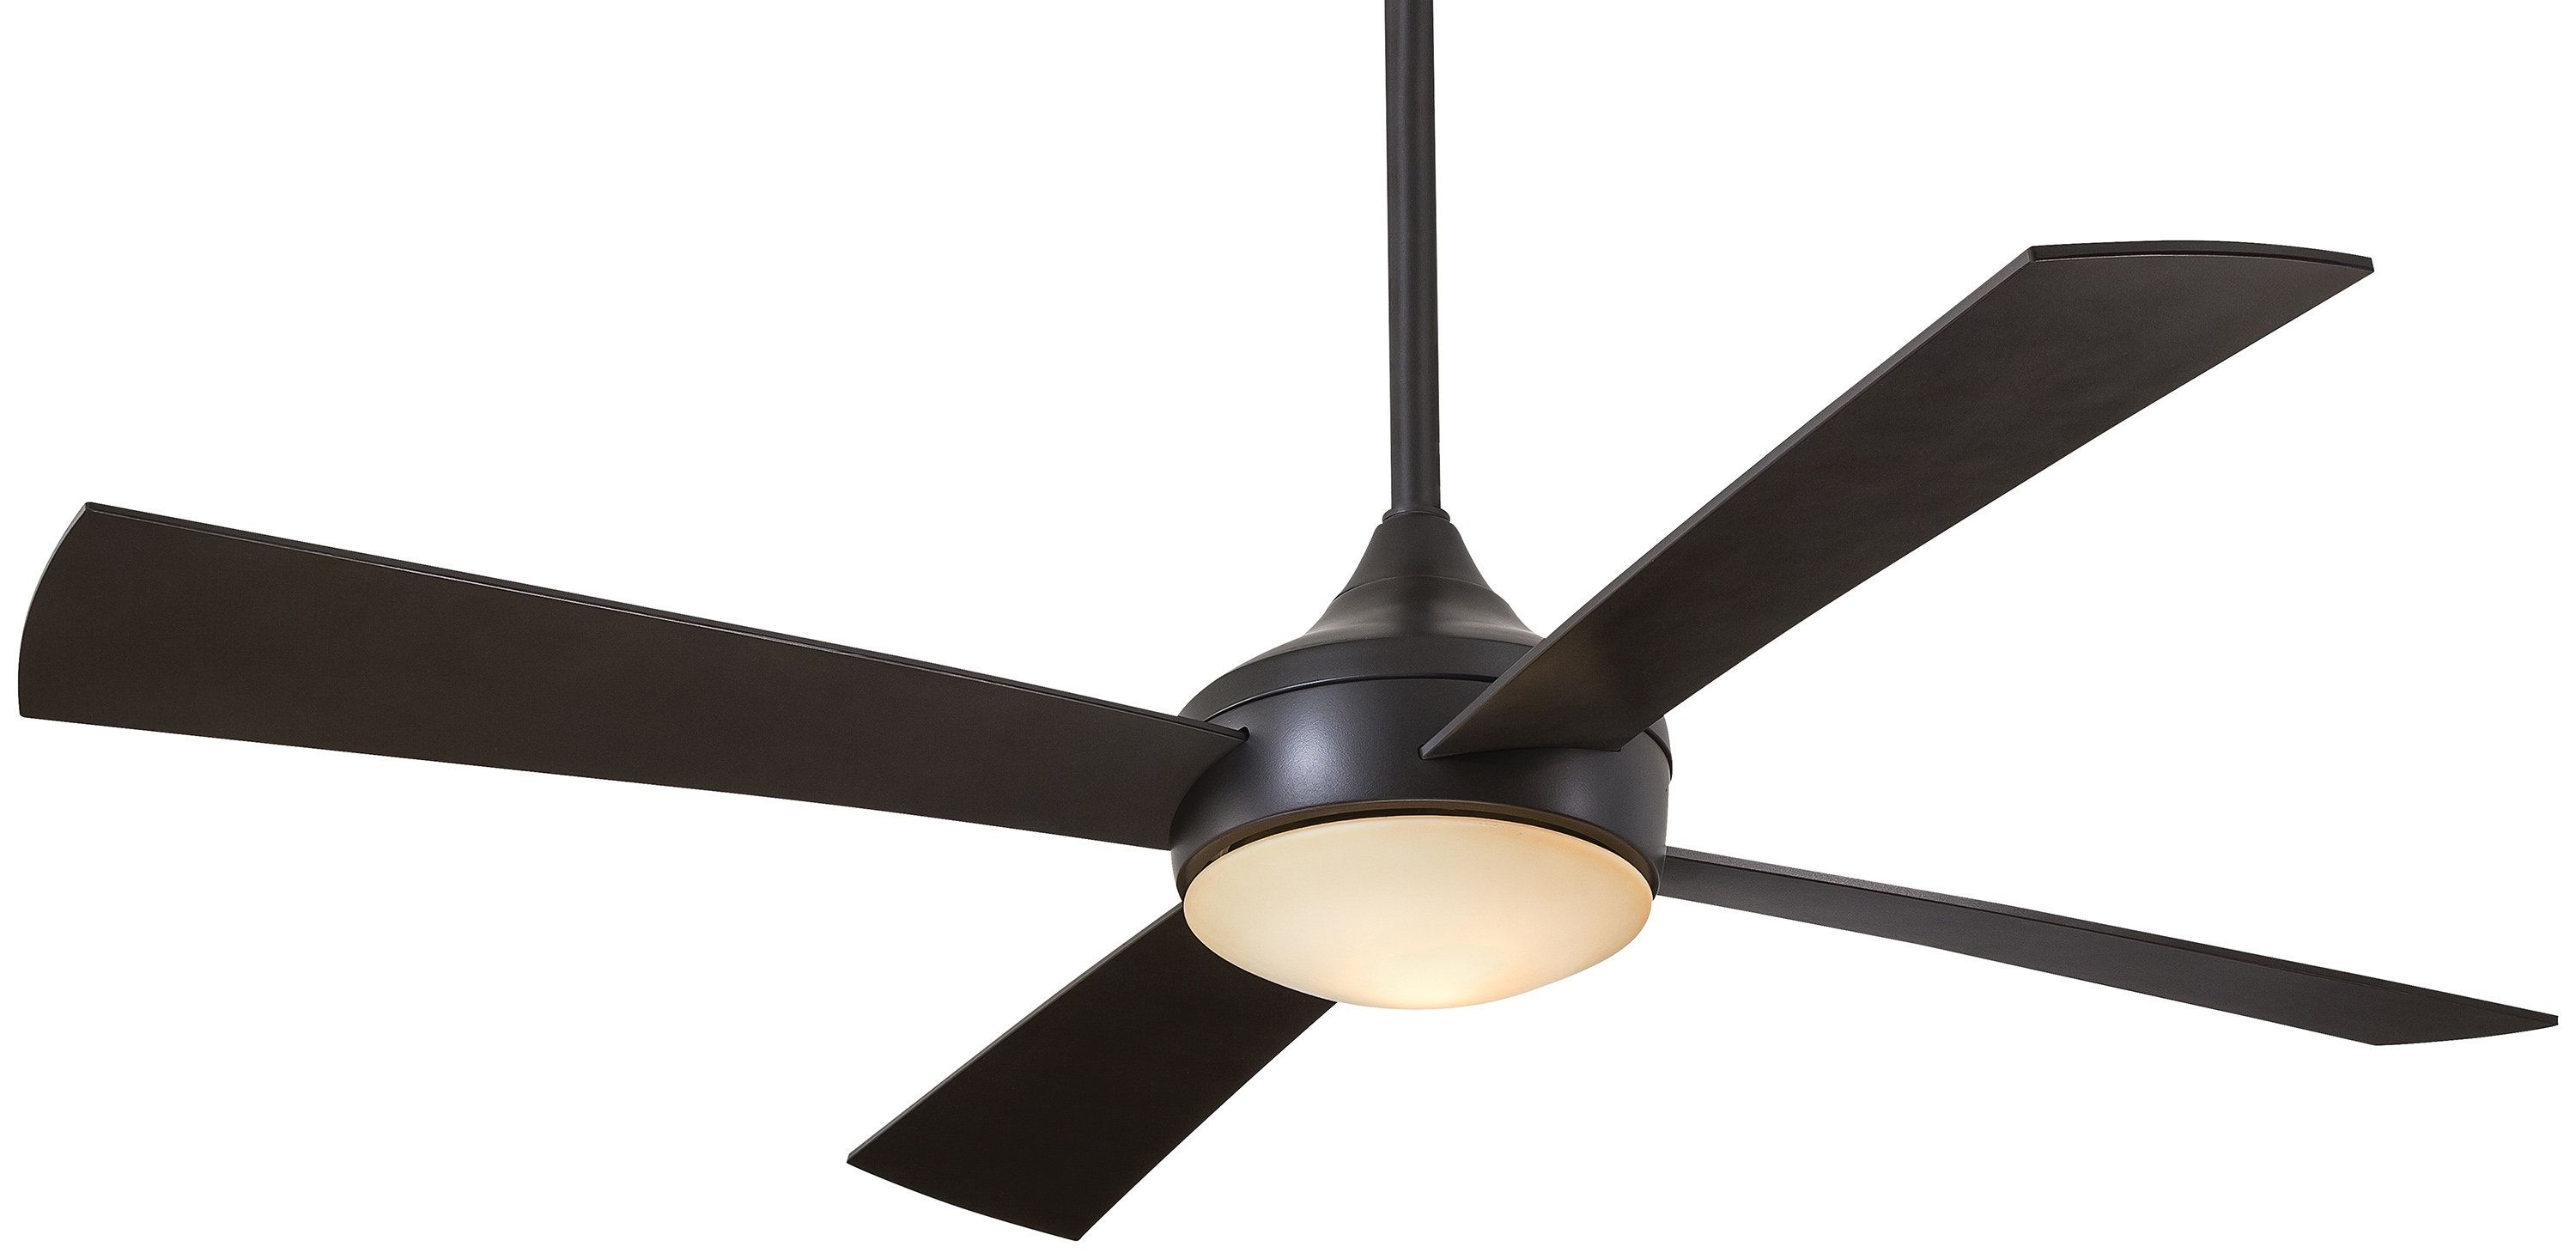 Minka Aire 52" Aluma Wet 4 Blade Outdoor Led Ceiling Fan With Remote Inside Current Outdoor Ceiling Fans With Remote (View 10 of 20)